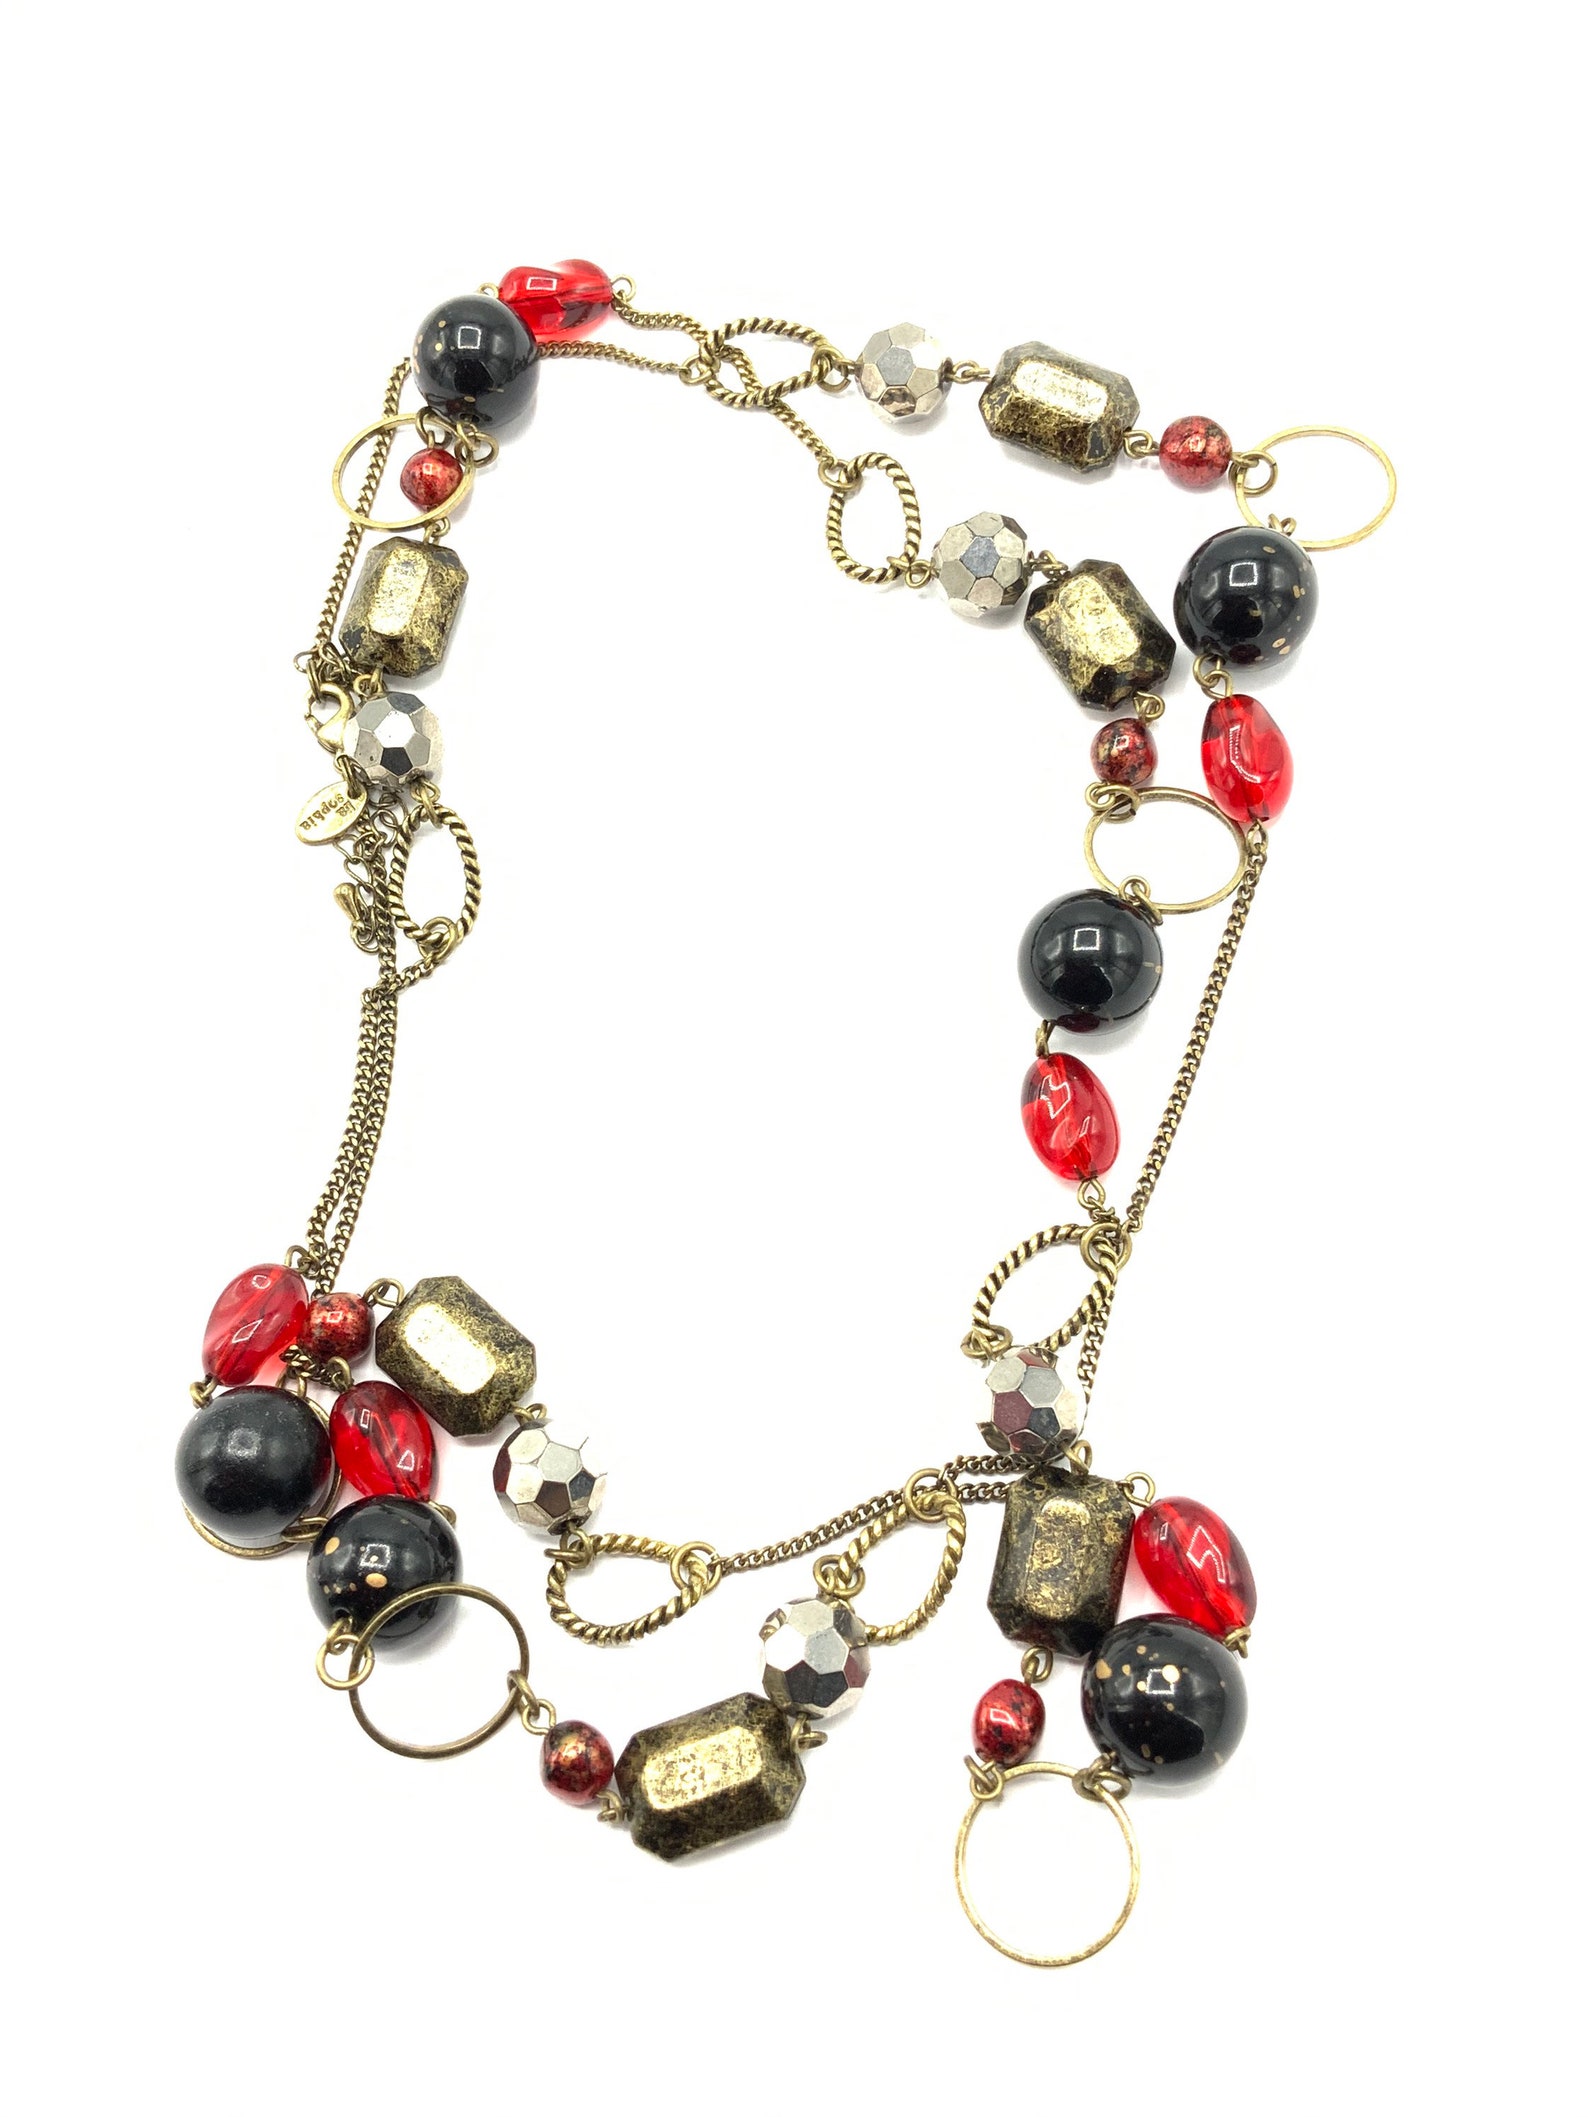 Gorgeous Red and Black Beads Necklace by Lia Sophia Long - Etsy